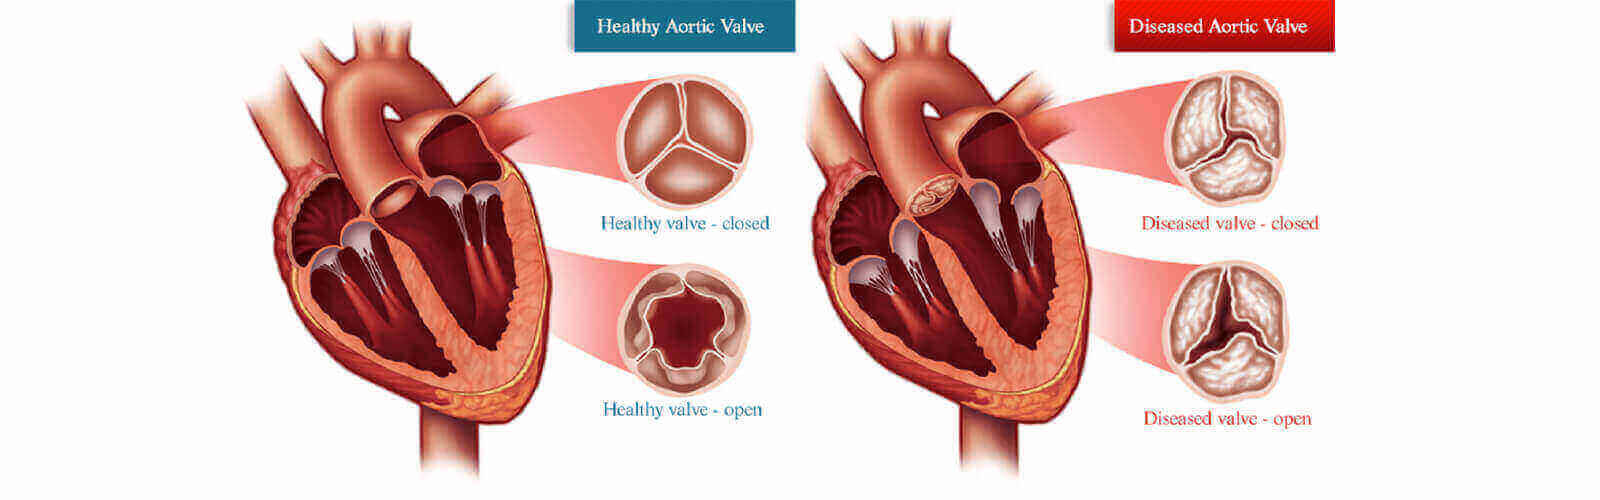 Heart Valve Replacement Surgery in United Kingdom